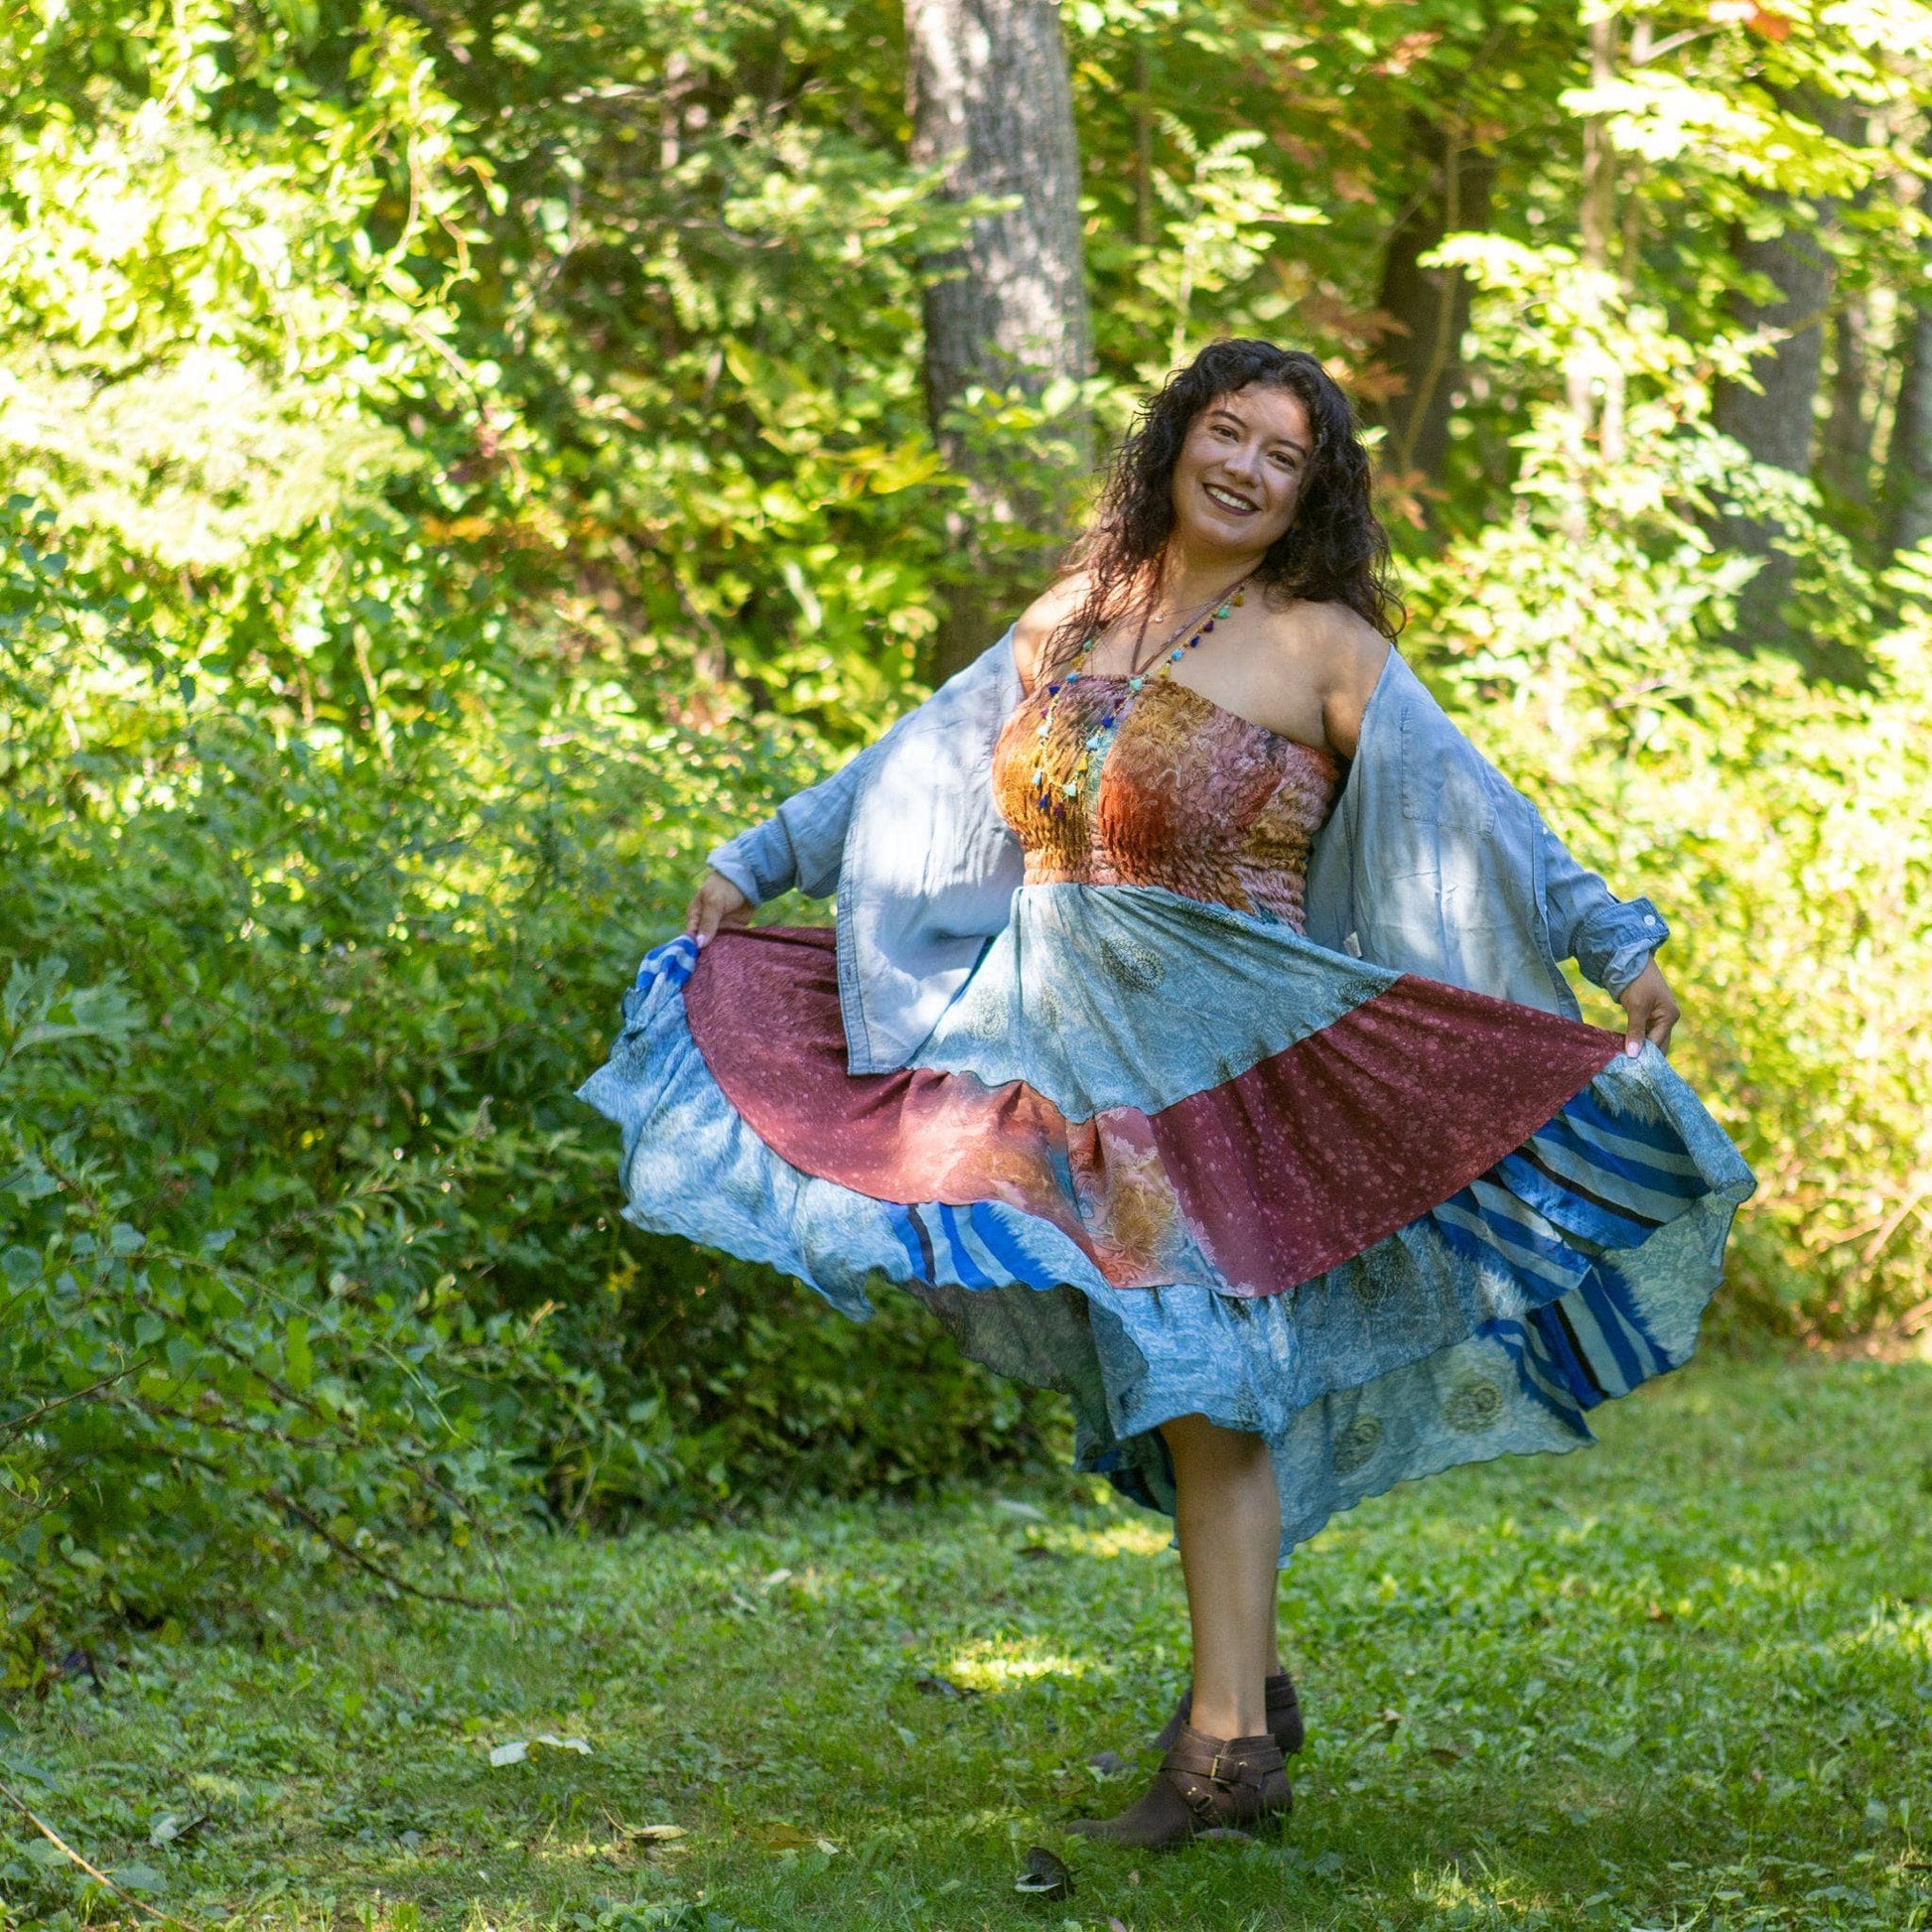 Lady showing the pattern of her Sedona patchwork skirt while standing in the woods with greenery in the background.